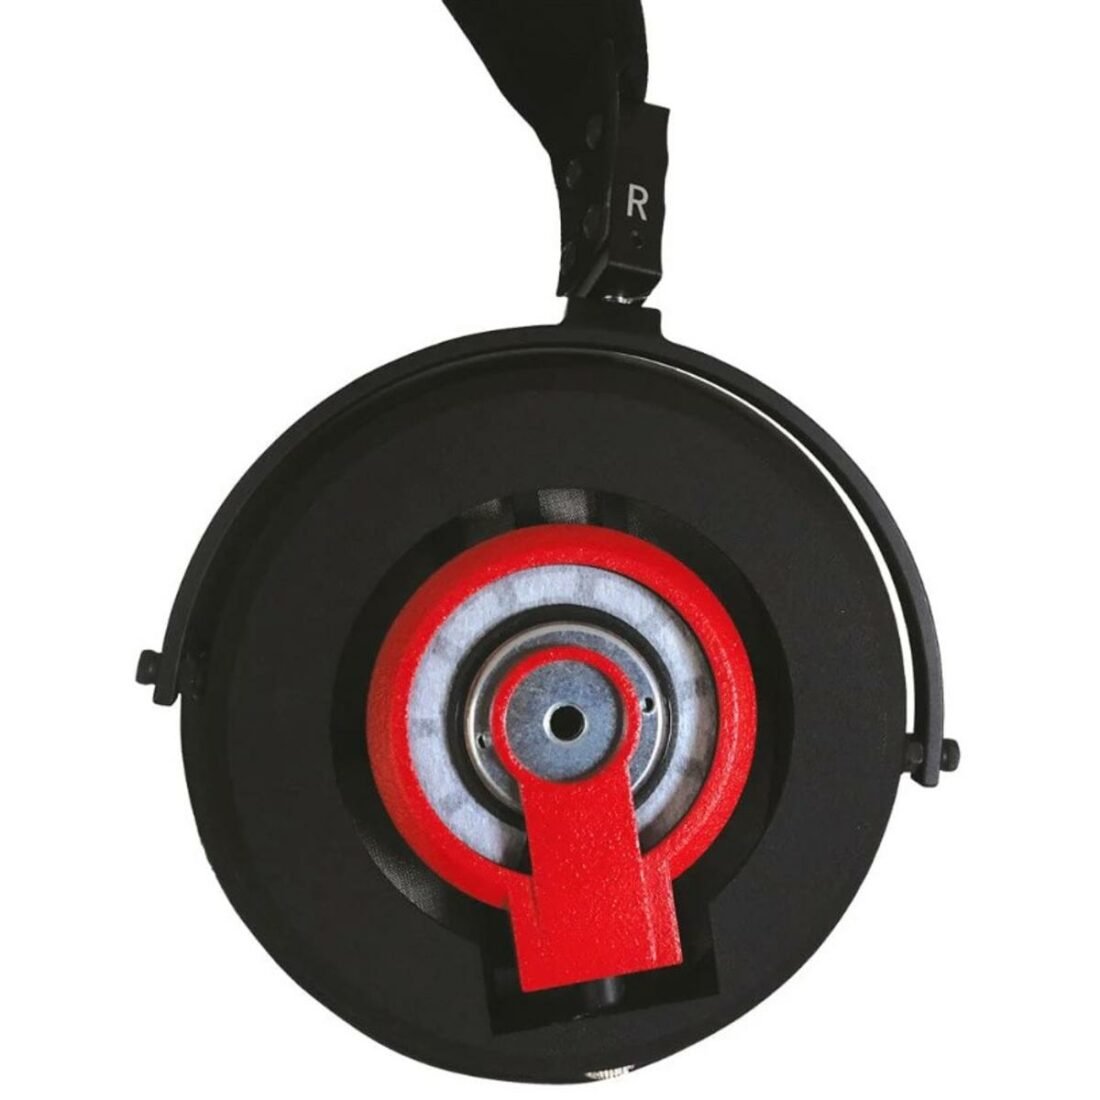 Exposed drivers on the DMS Project Omega Headphones. (From: Headphones.com)